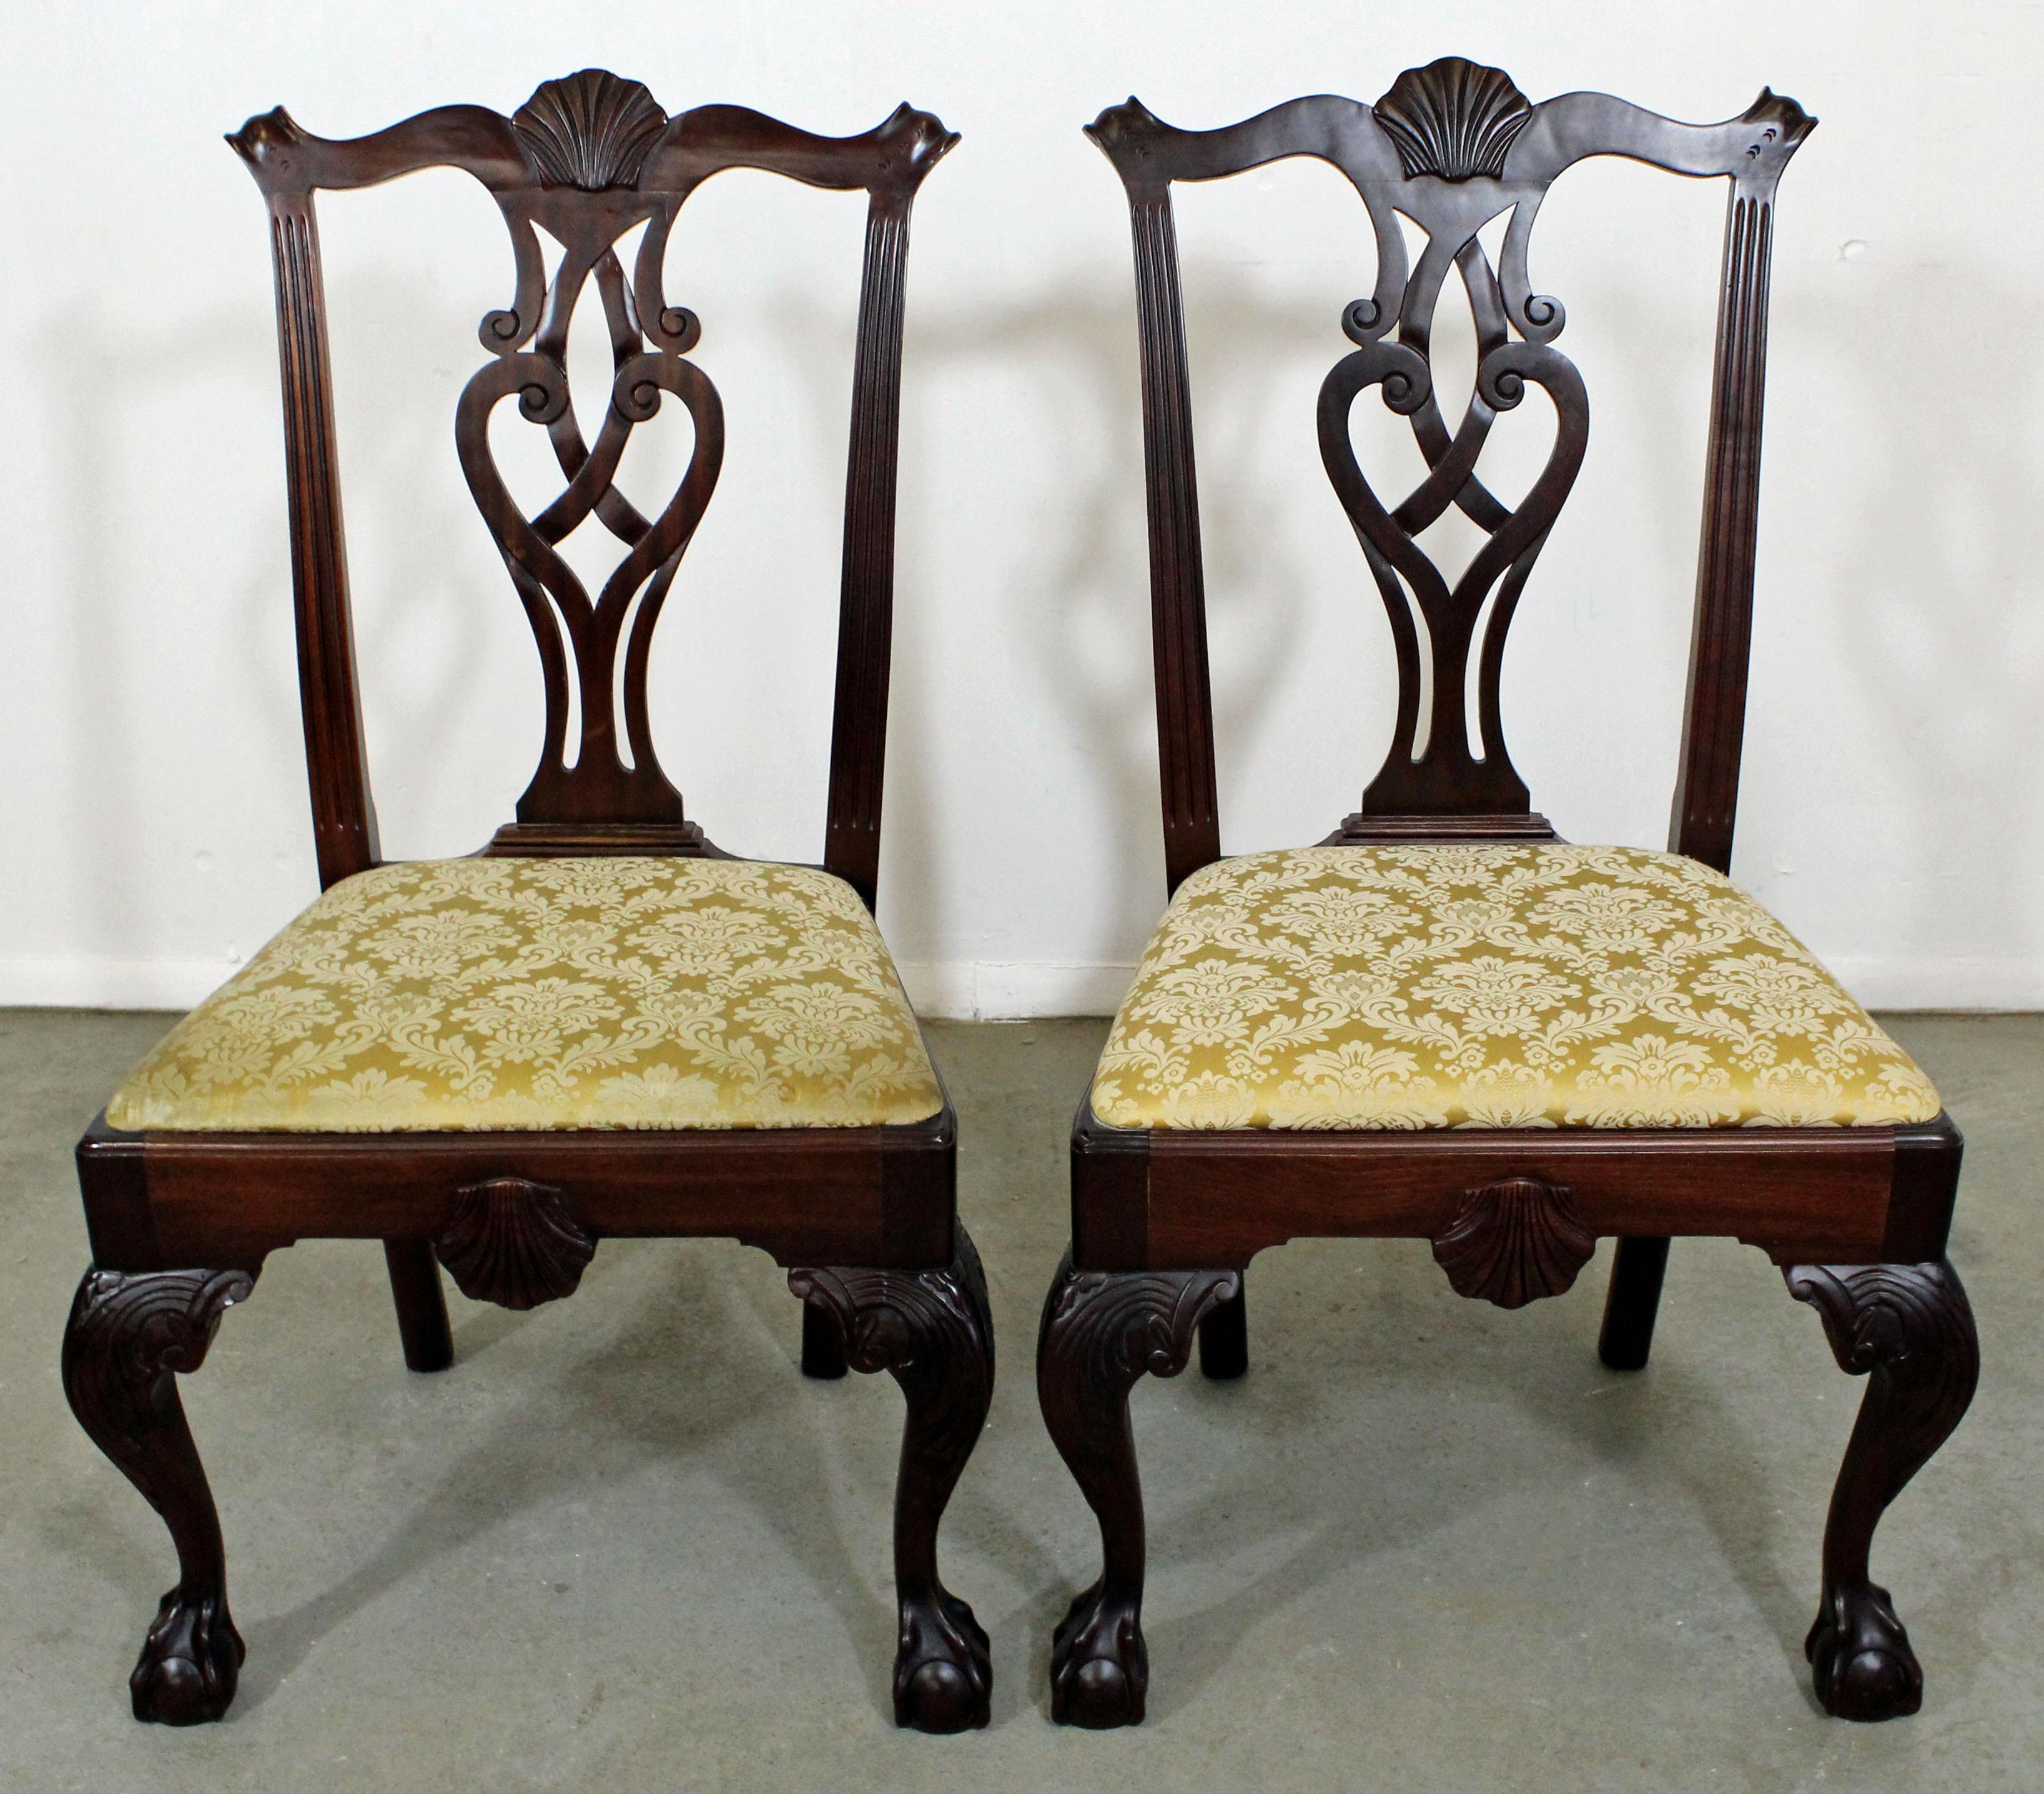 Offered is a pair of Chippendale mahogany dining chairs with ball and claw feet. They are in good condition, minus some slight age wear, need to be reupholstered. A great set to add to your home. They excellent quality and marked 'Made in Italy' but